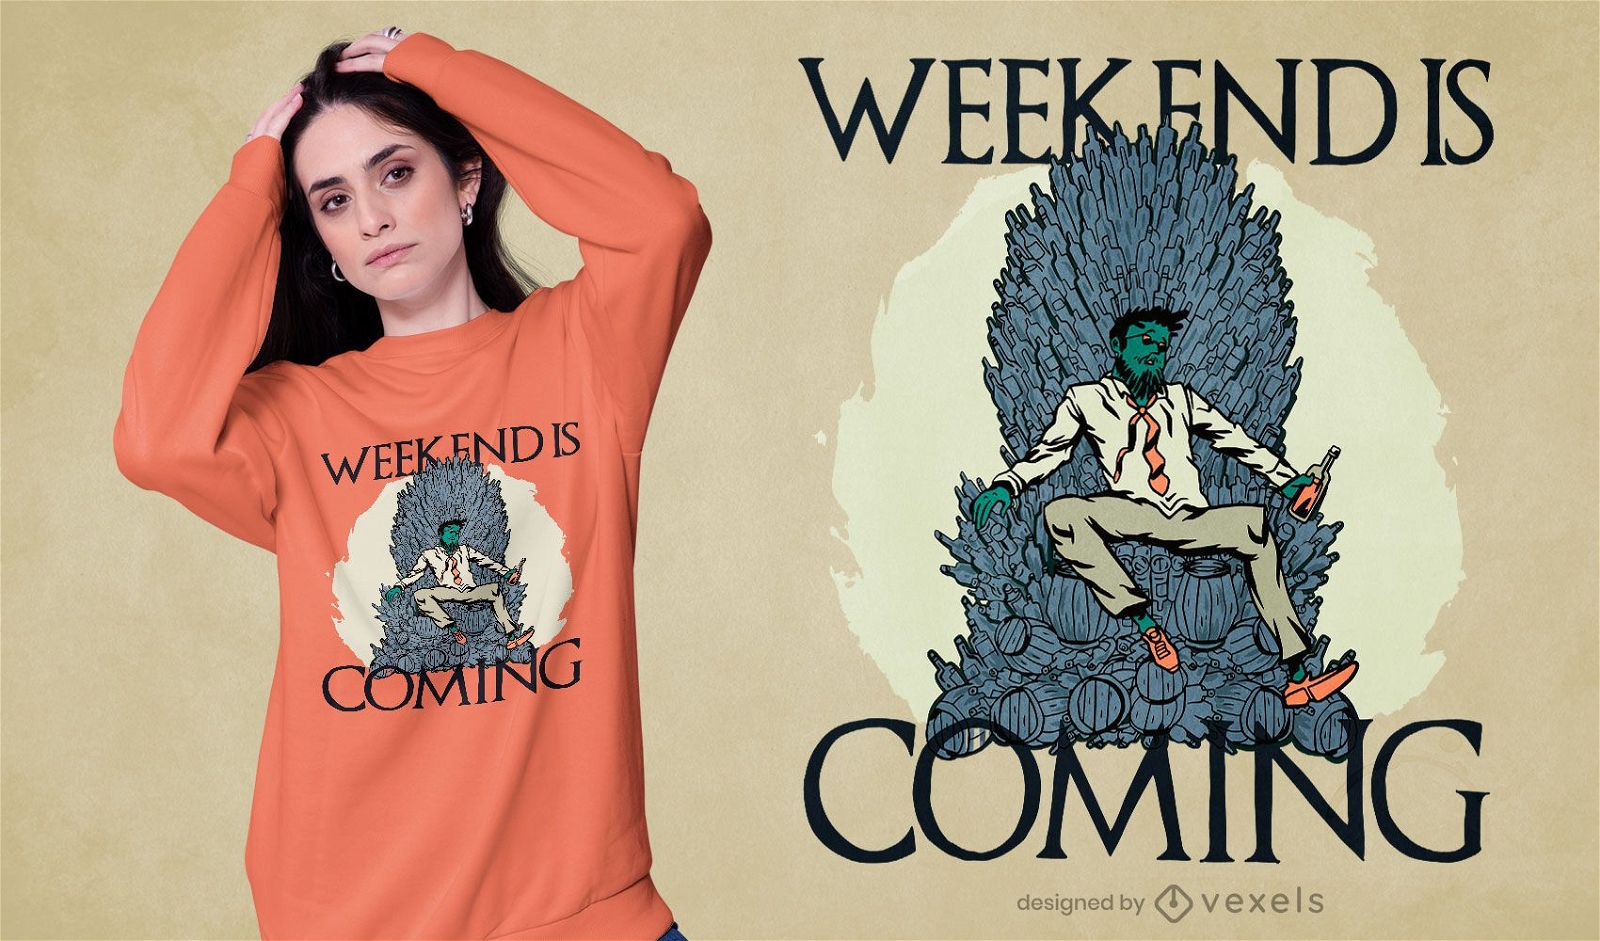 Weekend is coming t-shirt design